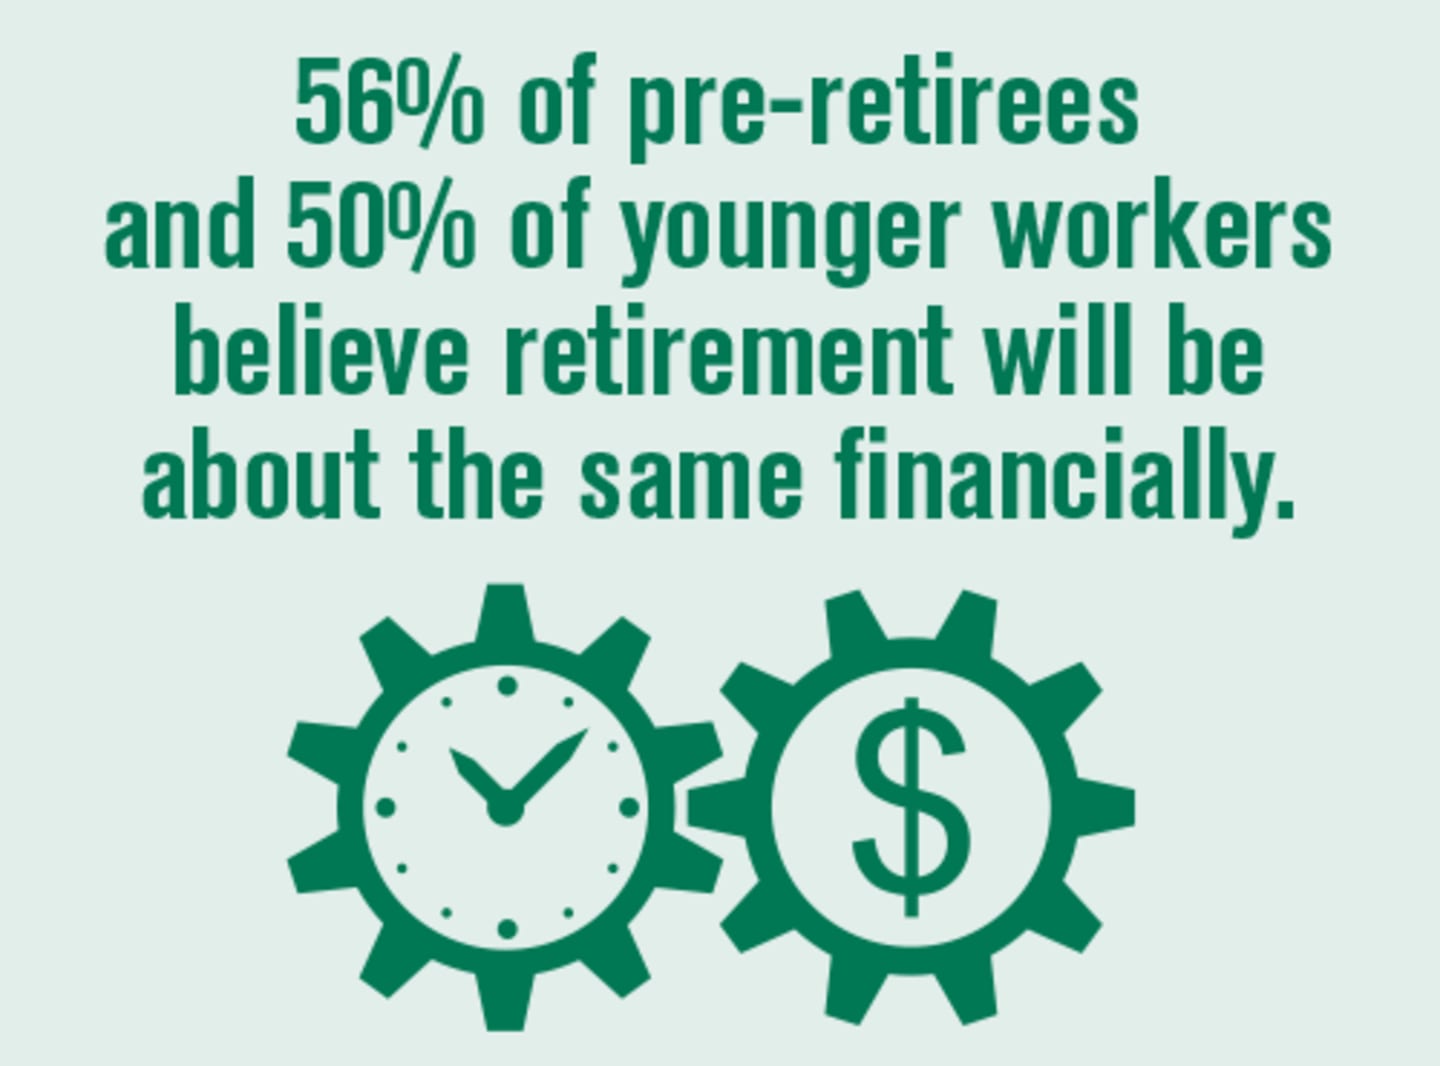 56% of pre-retirees and 50% of younger workers believe retirement will be about the same financially.